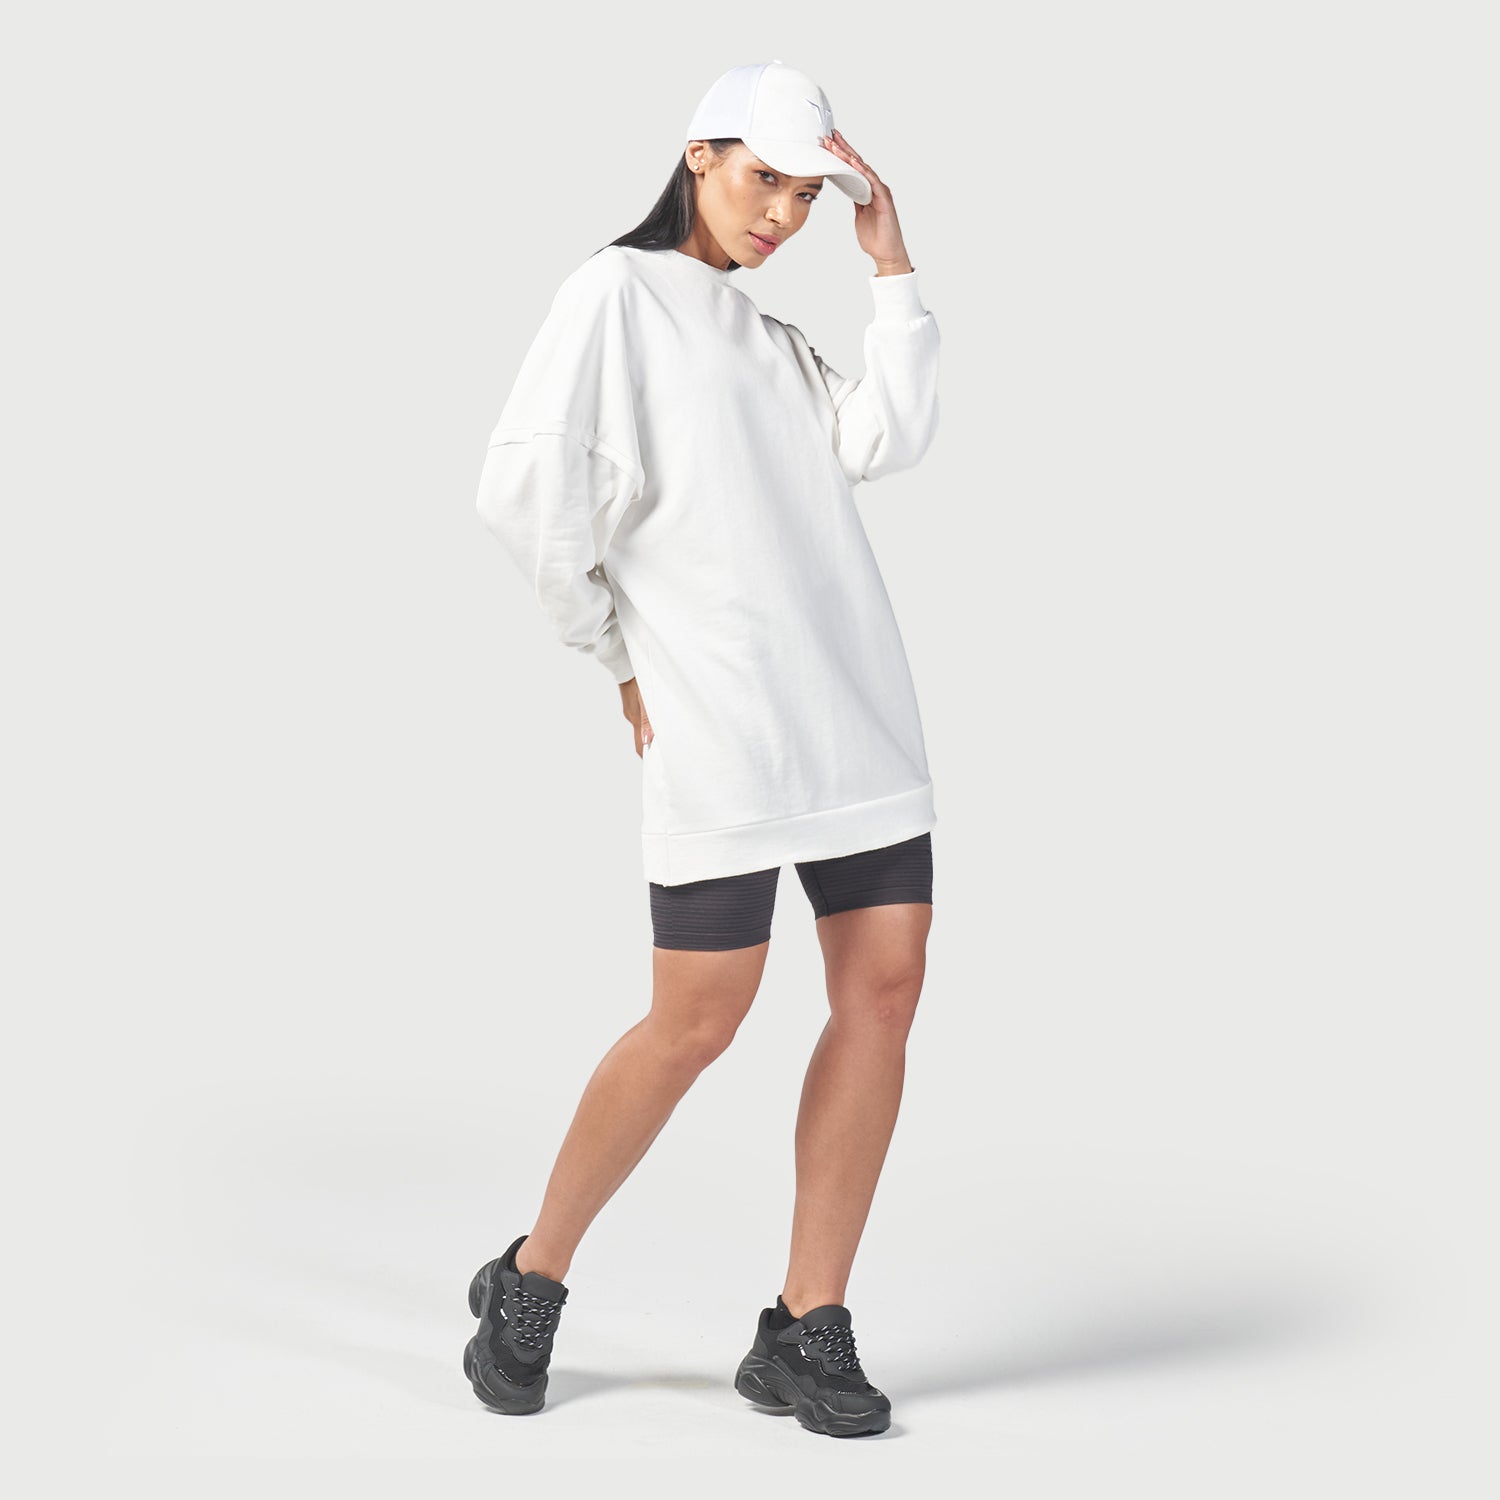 squatwolf-workout-clothes-infinity-relaxed-fit-dress-blanc-de-blanc-gym-t-shirts-for-women